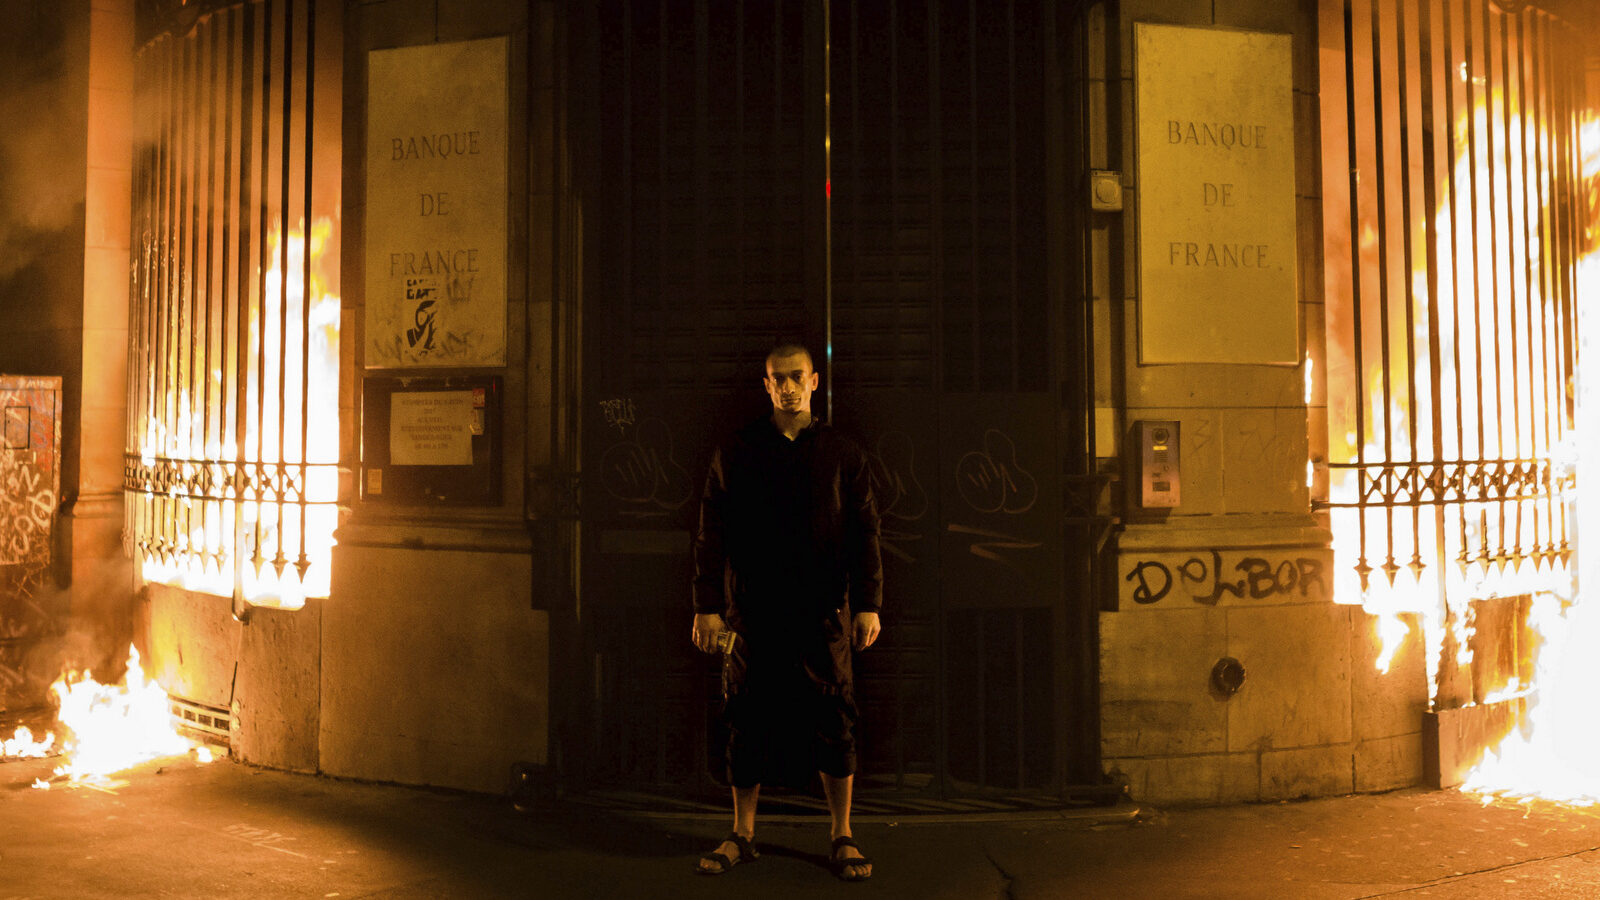 Russian artist Petr Pavlensky poses in front of a Banque de France building after setting fire to the window gates as part of a performance in Paris, Monday, Oct. 16, 2017. Pavlensky, known for macabre, politically charged actions, was being detained by police. (AP/Capucine Henry)